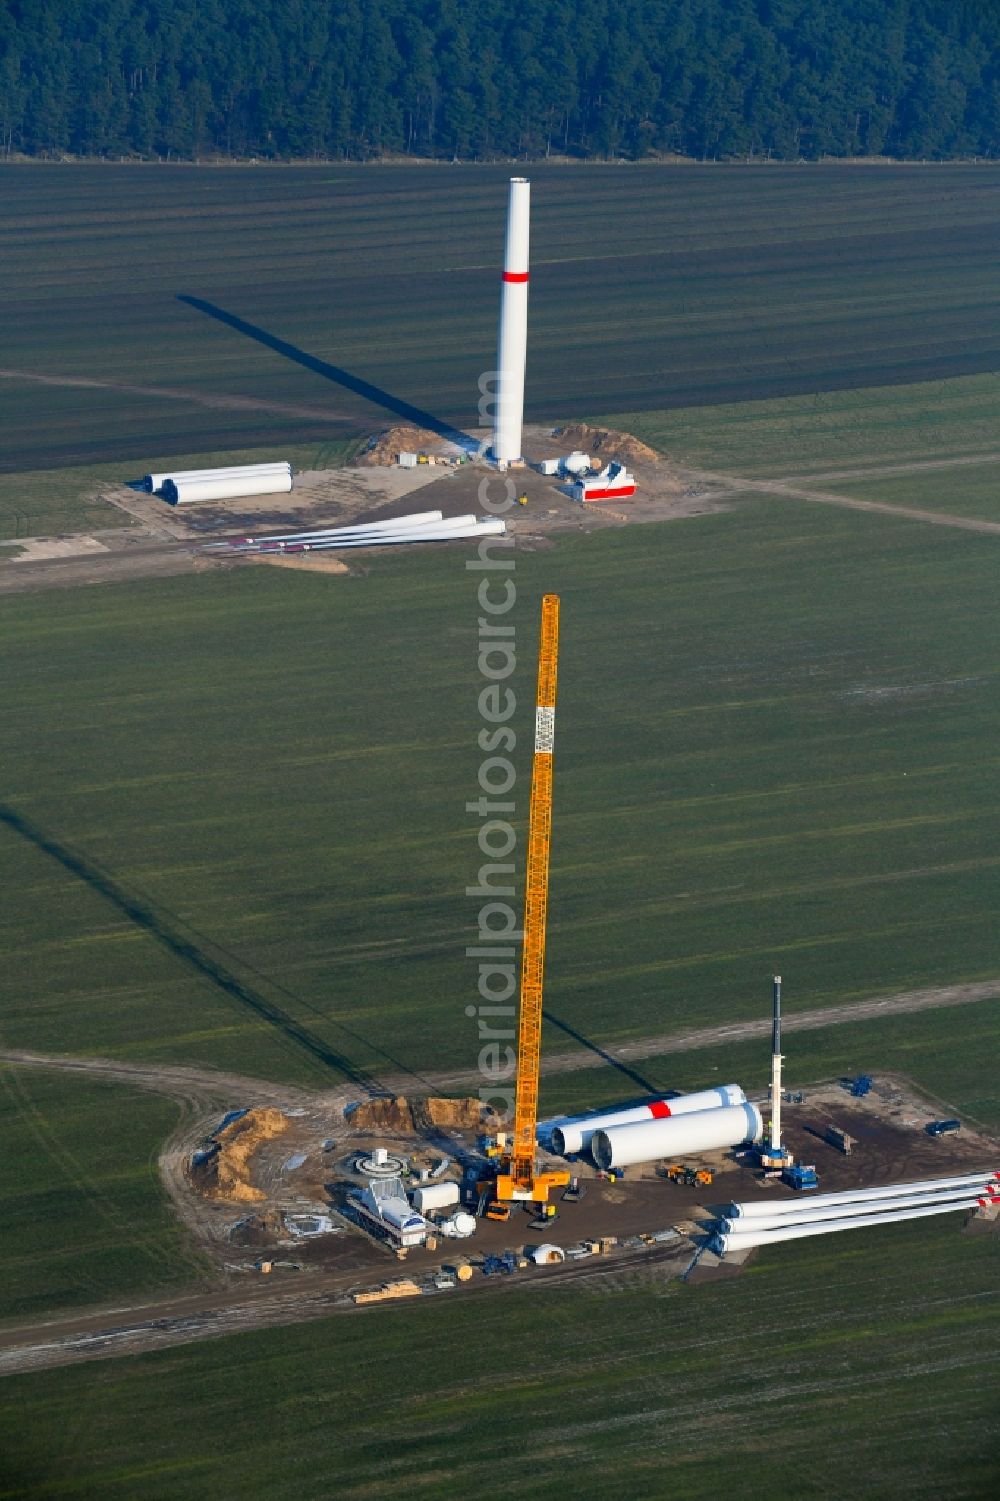 Willmersdorf from above - Construction site for wind turbine installation on fields in Willmersdorf in the state Brandenburg, Germany